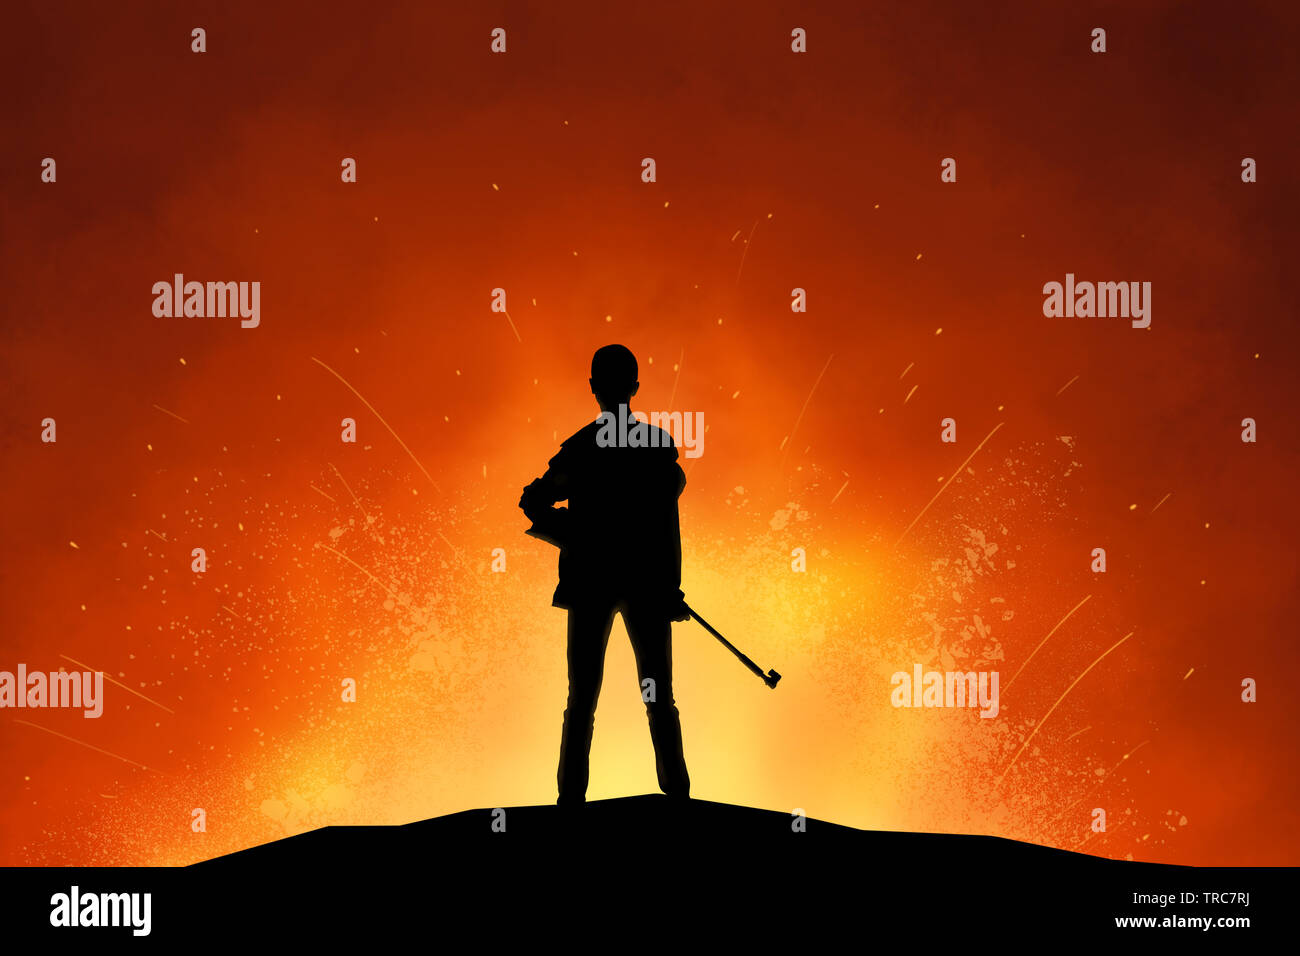 Dark silhouette of female soldier with rifle in front of explosion fire. Armed woman warrior posing while blast detonation behind her Stock Photo